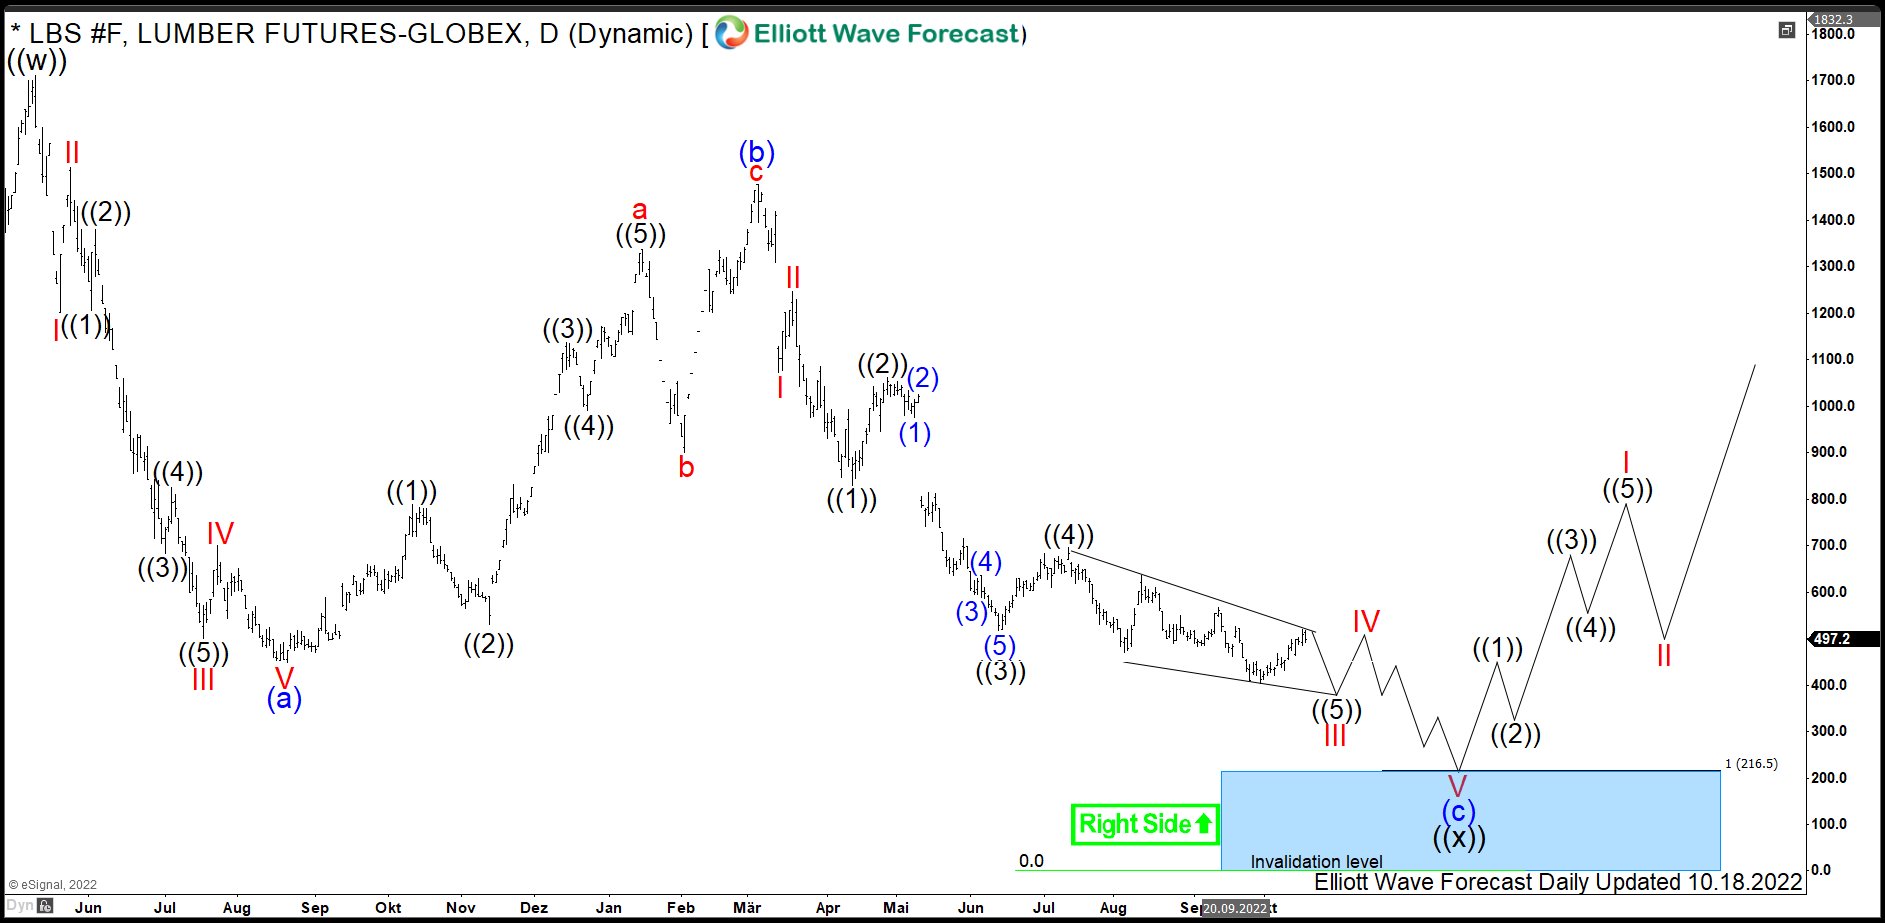 Lumber ($LBS) Futures Prices in a Historic Double Correction - Elliott Wave Forecast